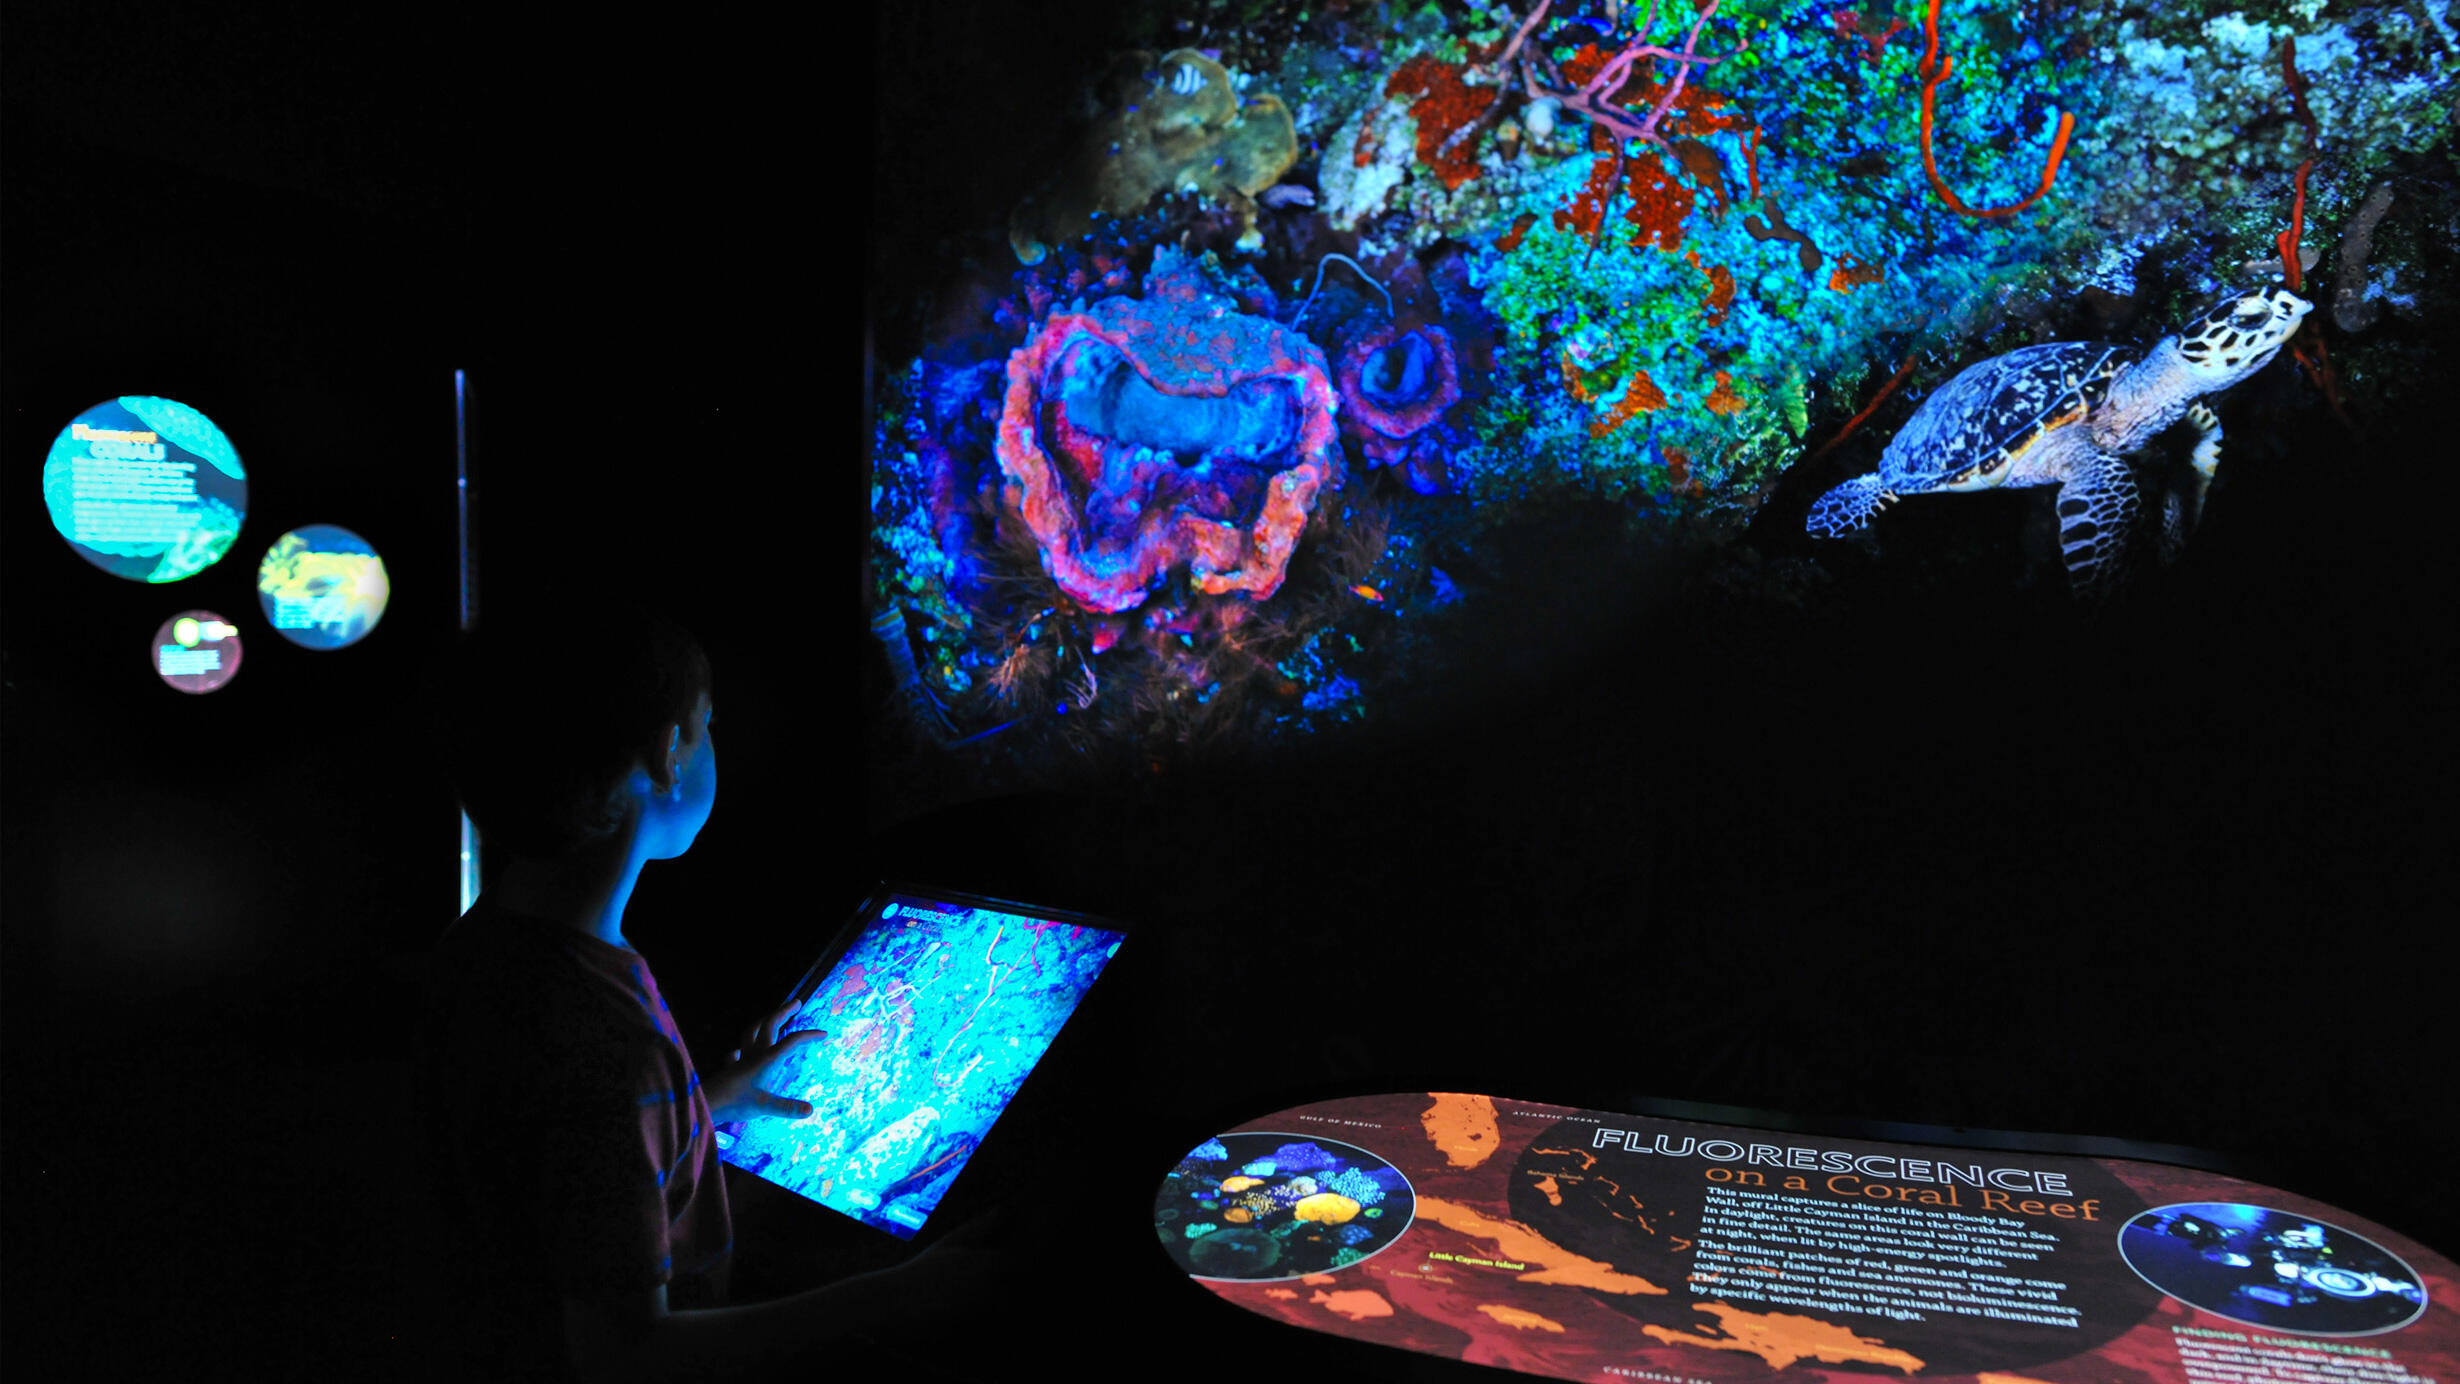 In a dark room a child uses a touchscreen monitor while looking up at a fluorescent glowing model of a coral reef and sea turtle